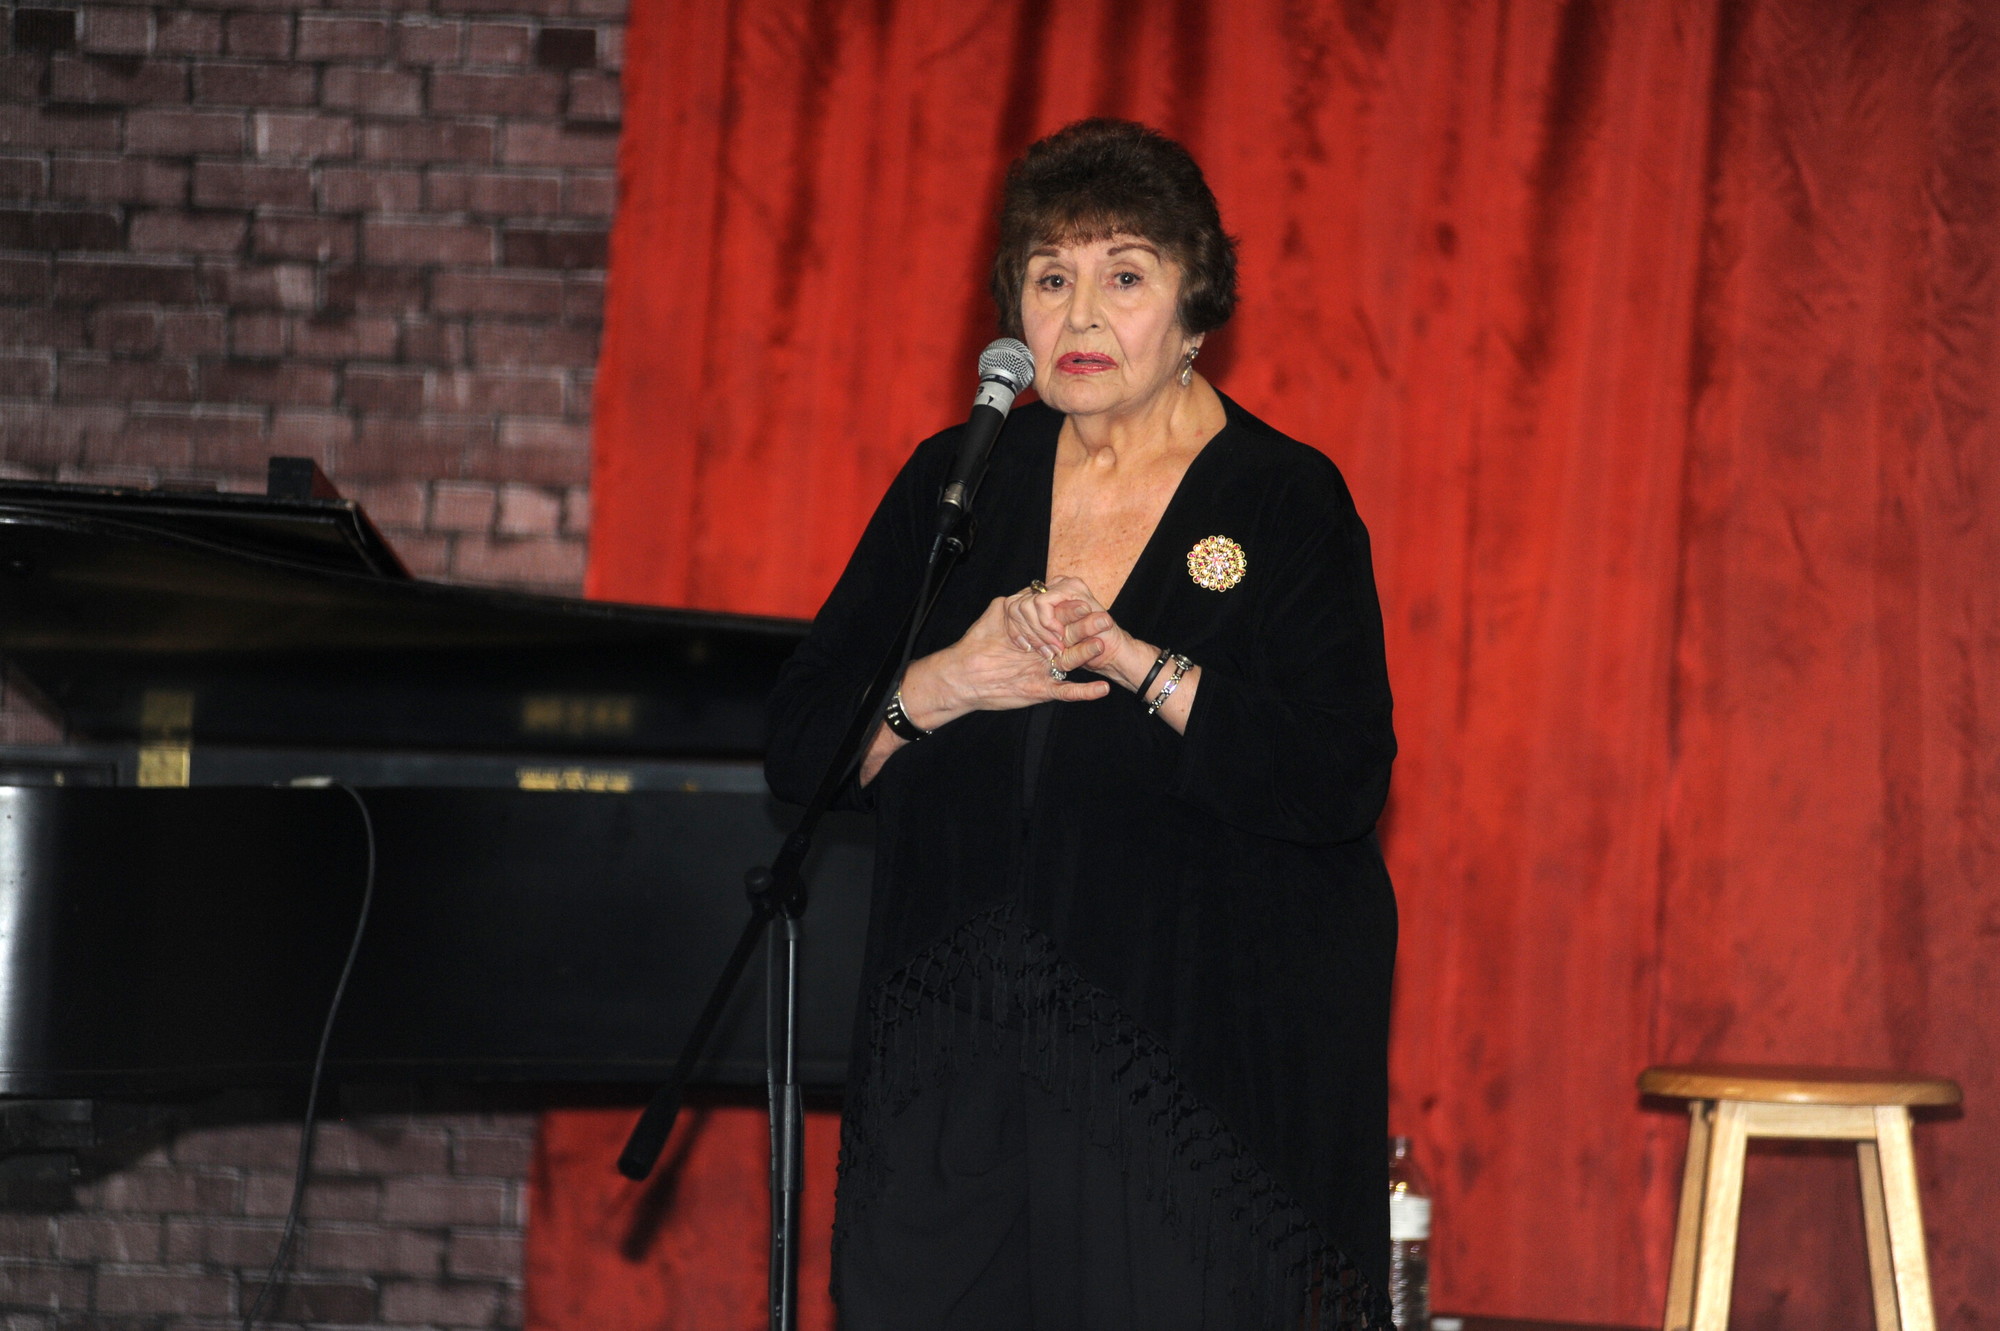 Lucina Mara performed ‘When I Have Sung My Songs to You’ as a tribute to Anita Darian.